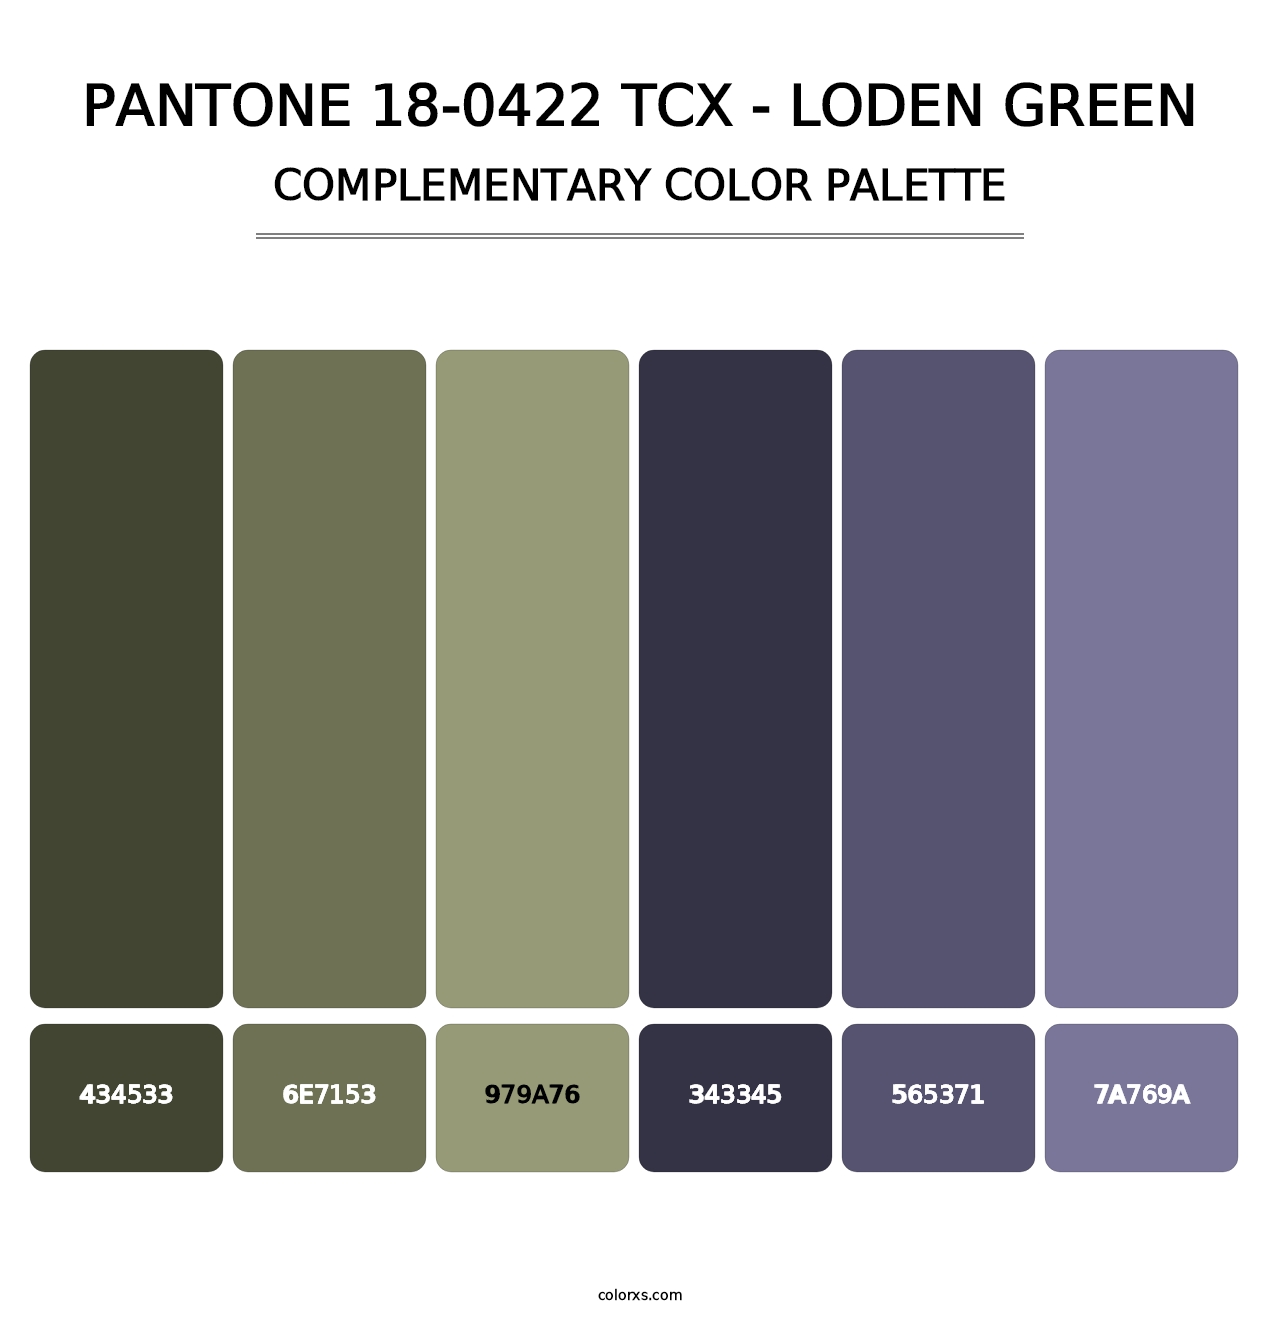 PANTONE 18-0422 TCX - Loden Green - Complementary Color Palette